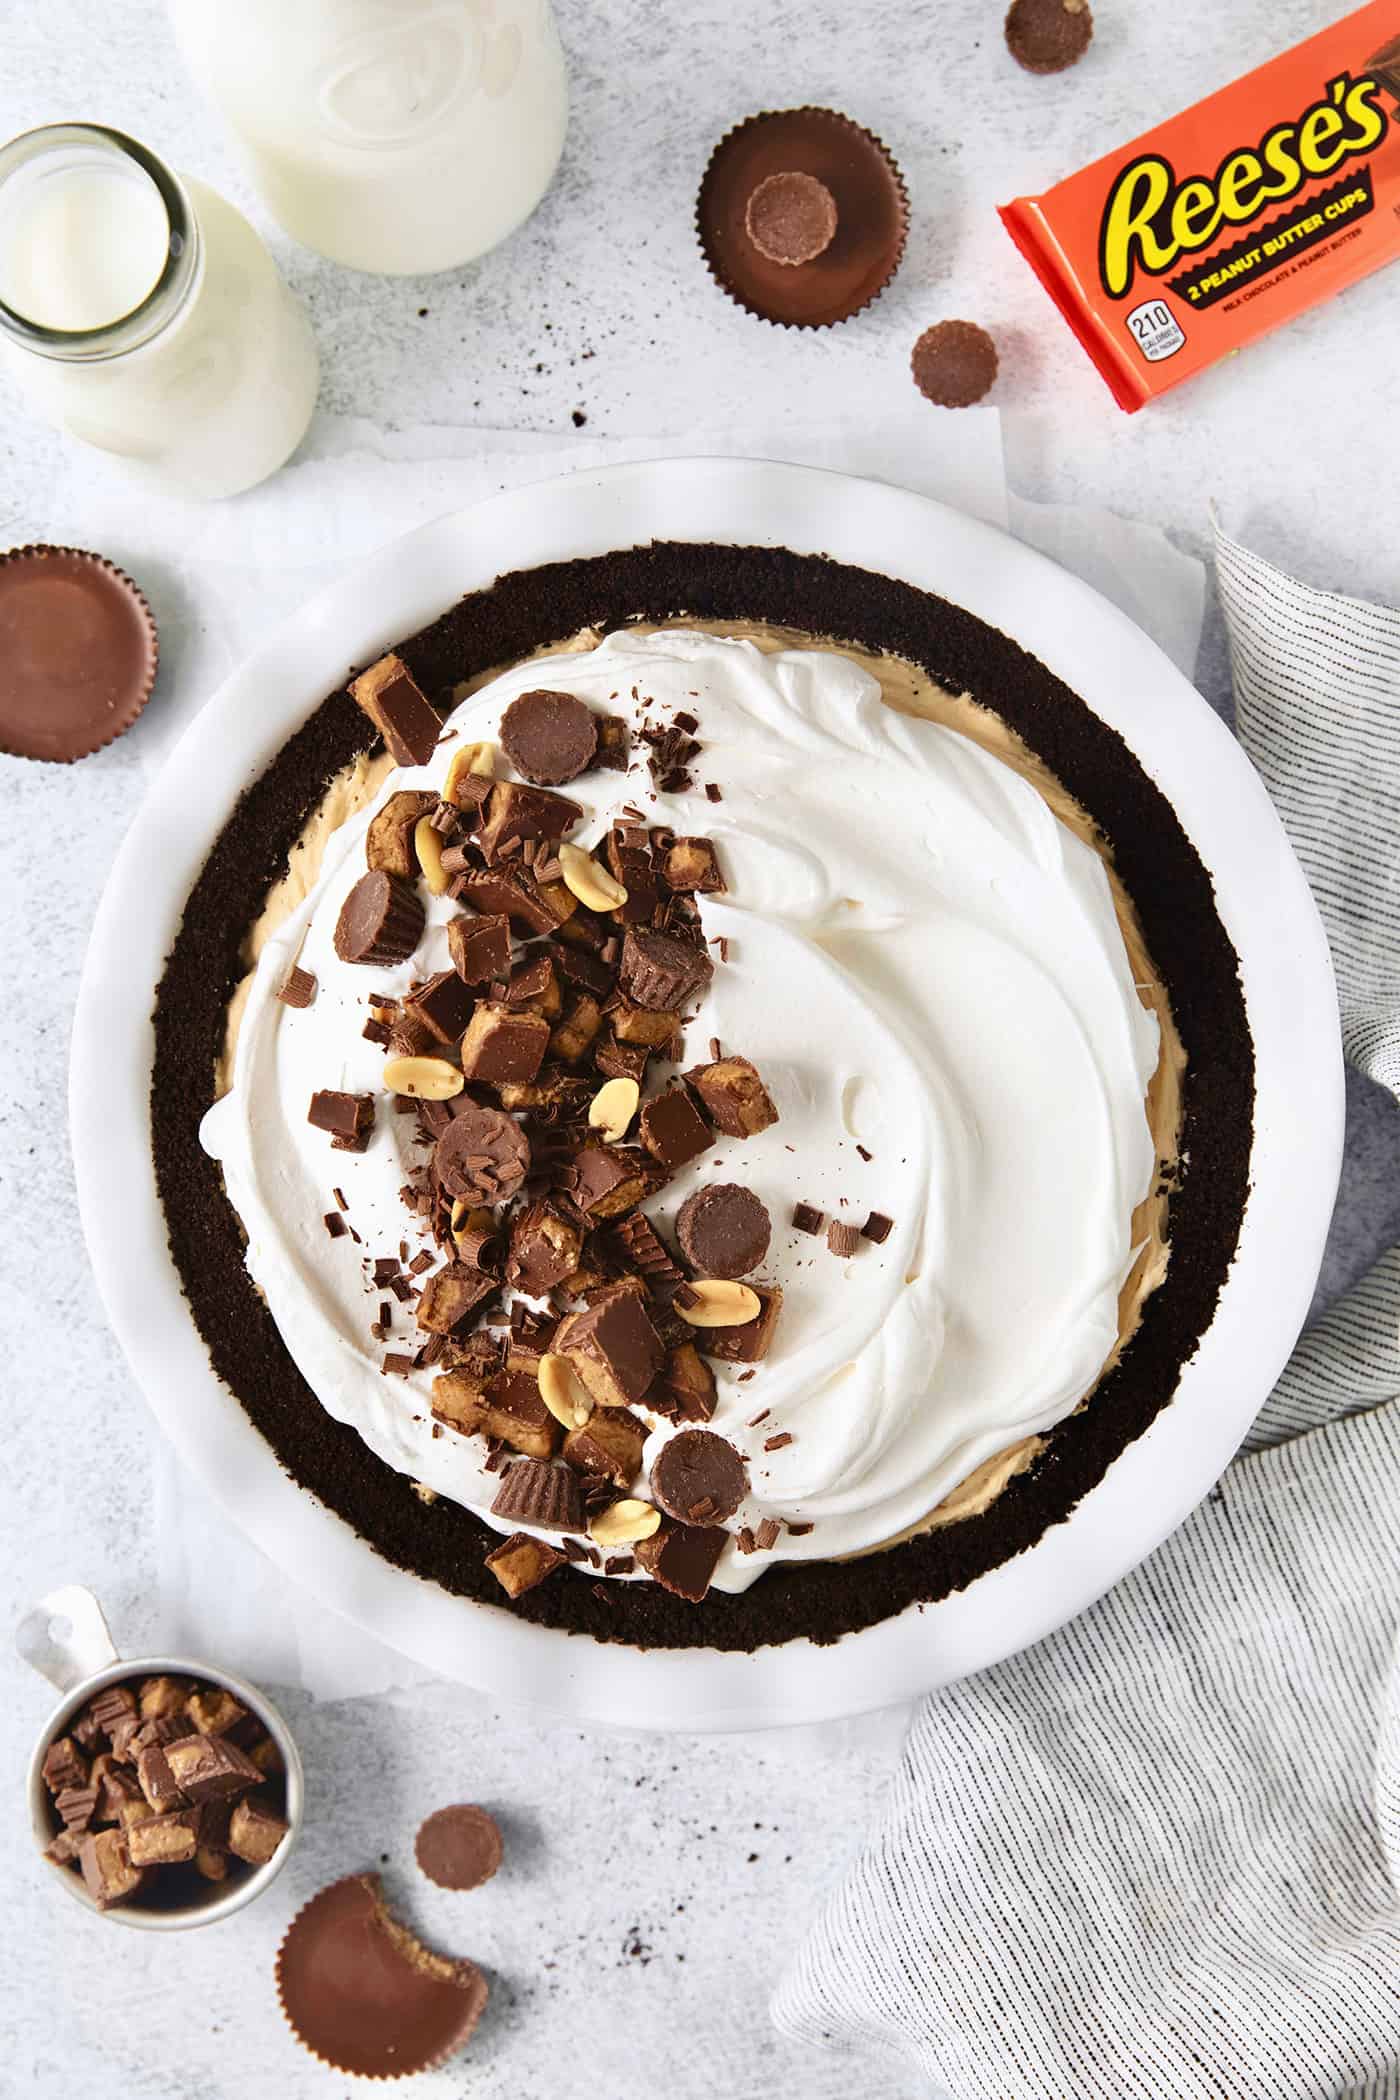 A whole Reeses pie on a white background with a package of peanut butter cups.